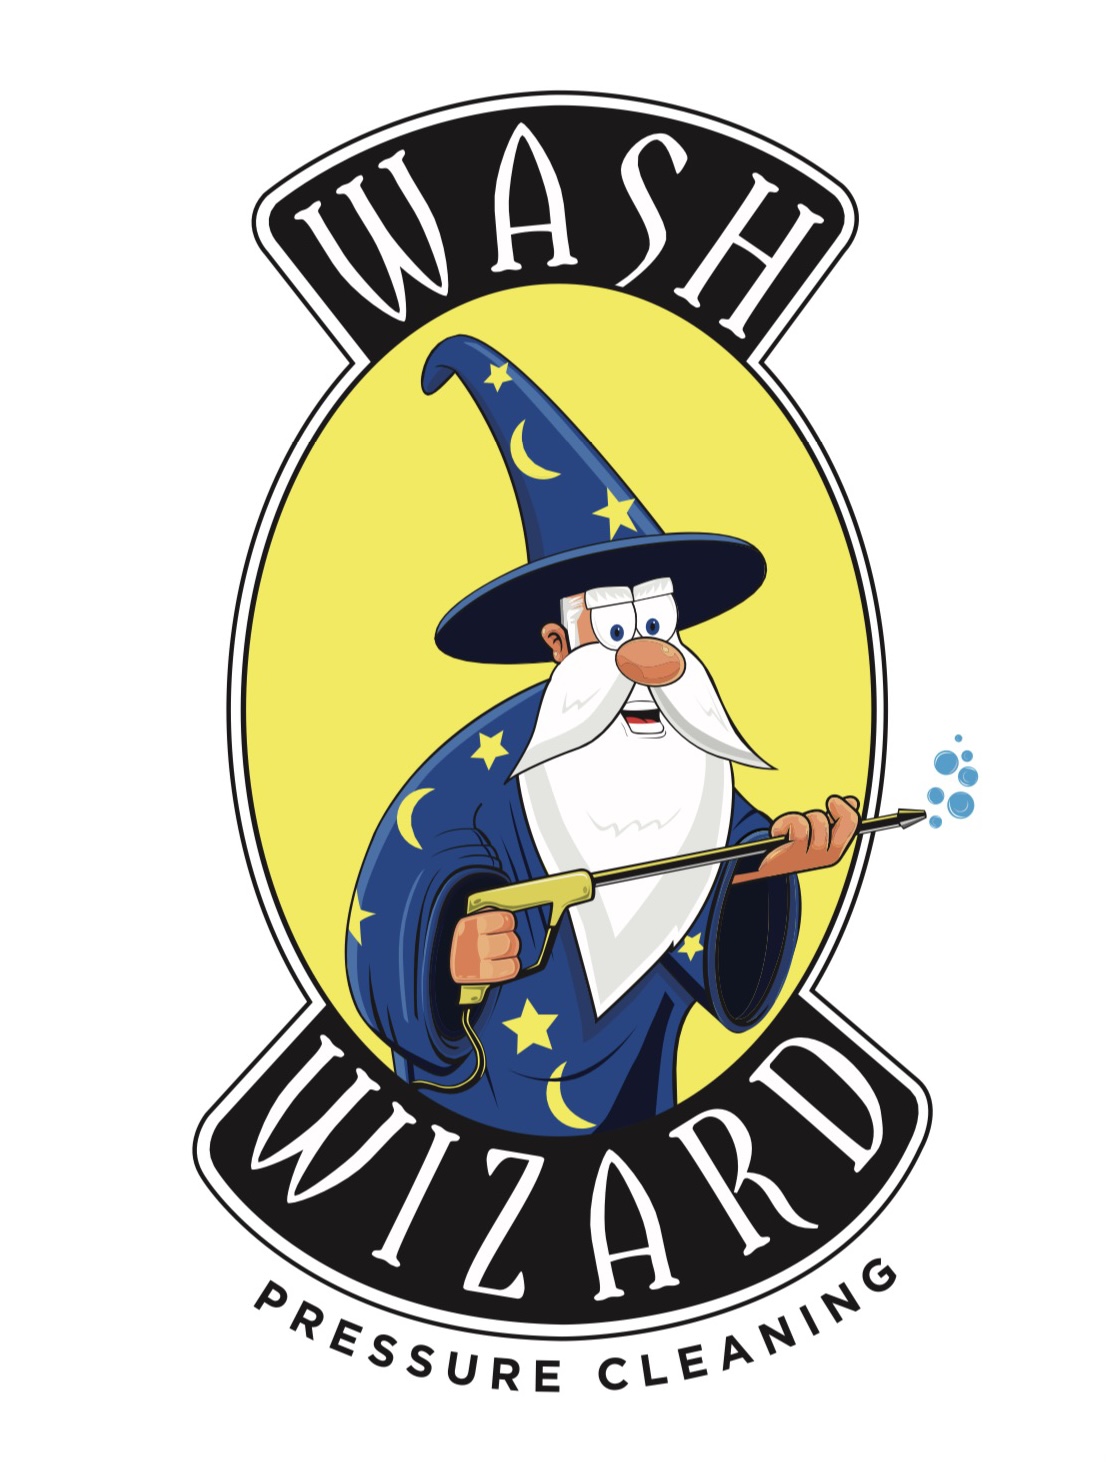 Wash Wizard Pressure Cleaning